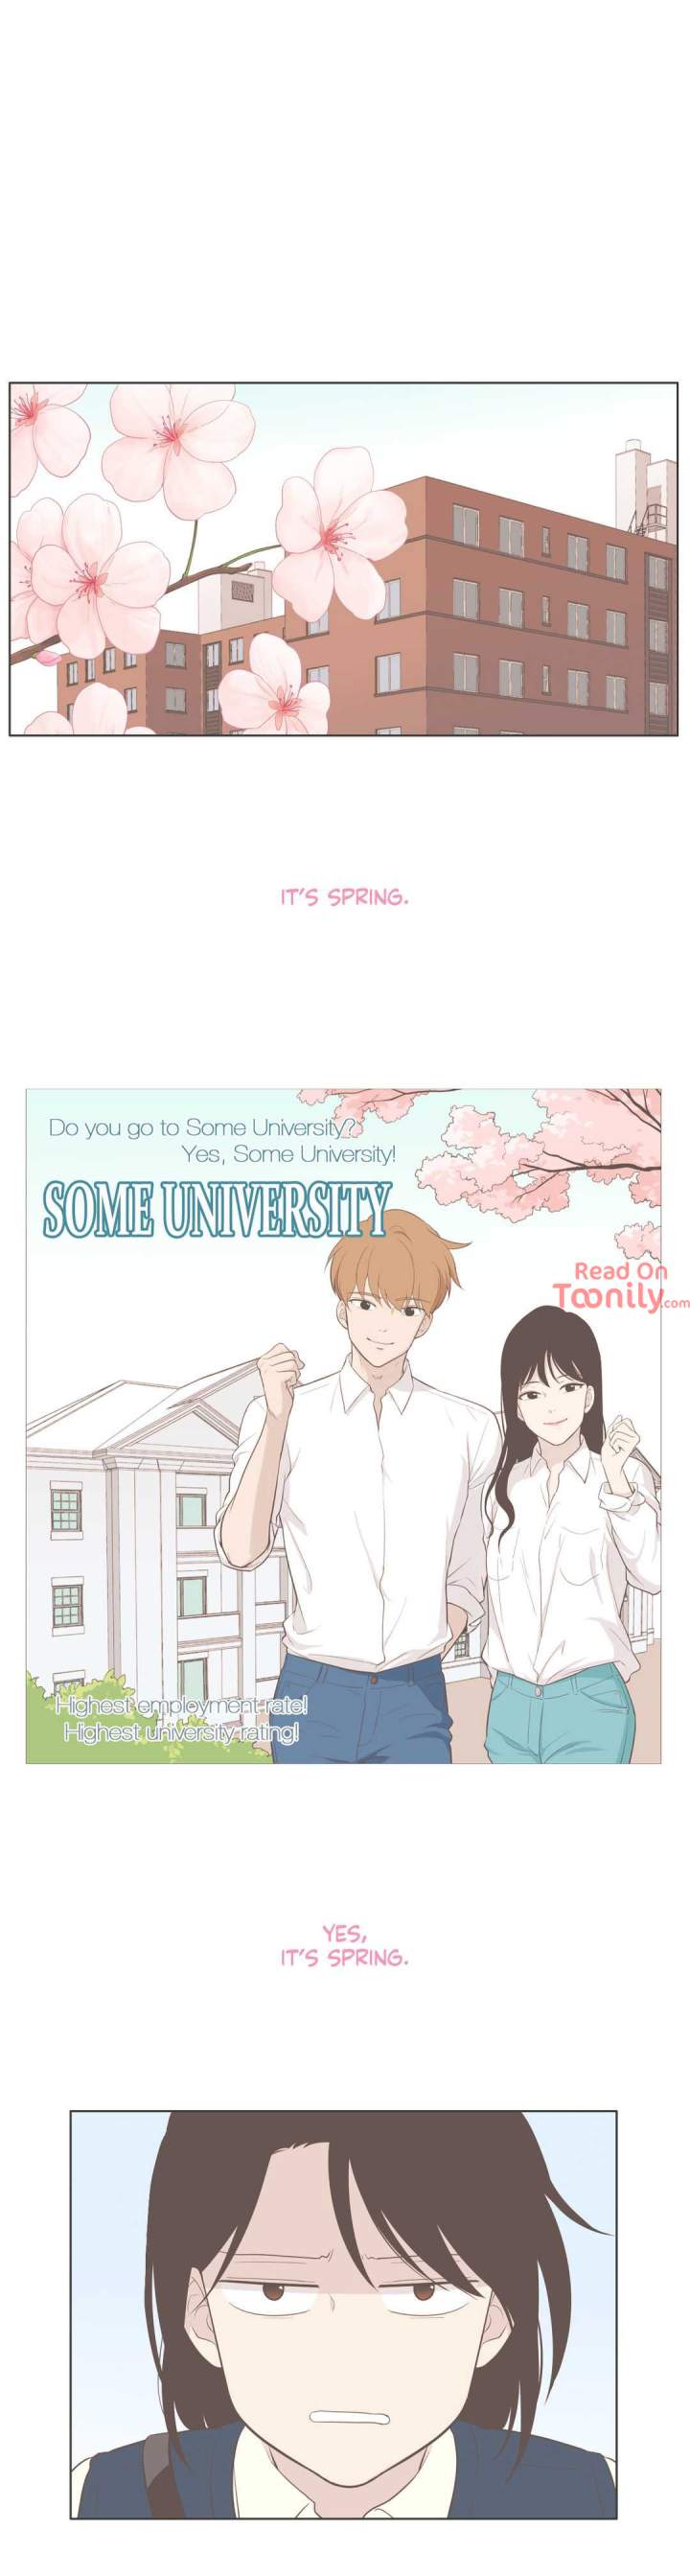 Something About Us - Chapter 76 Page 1